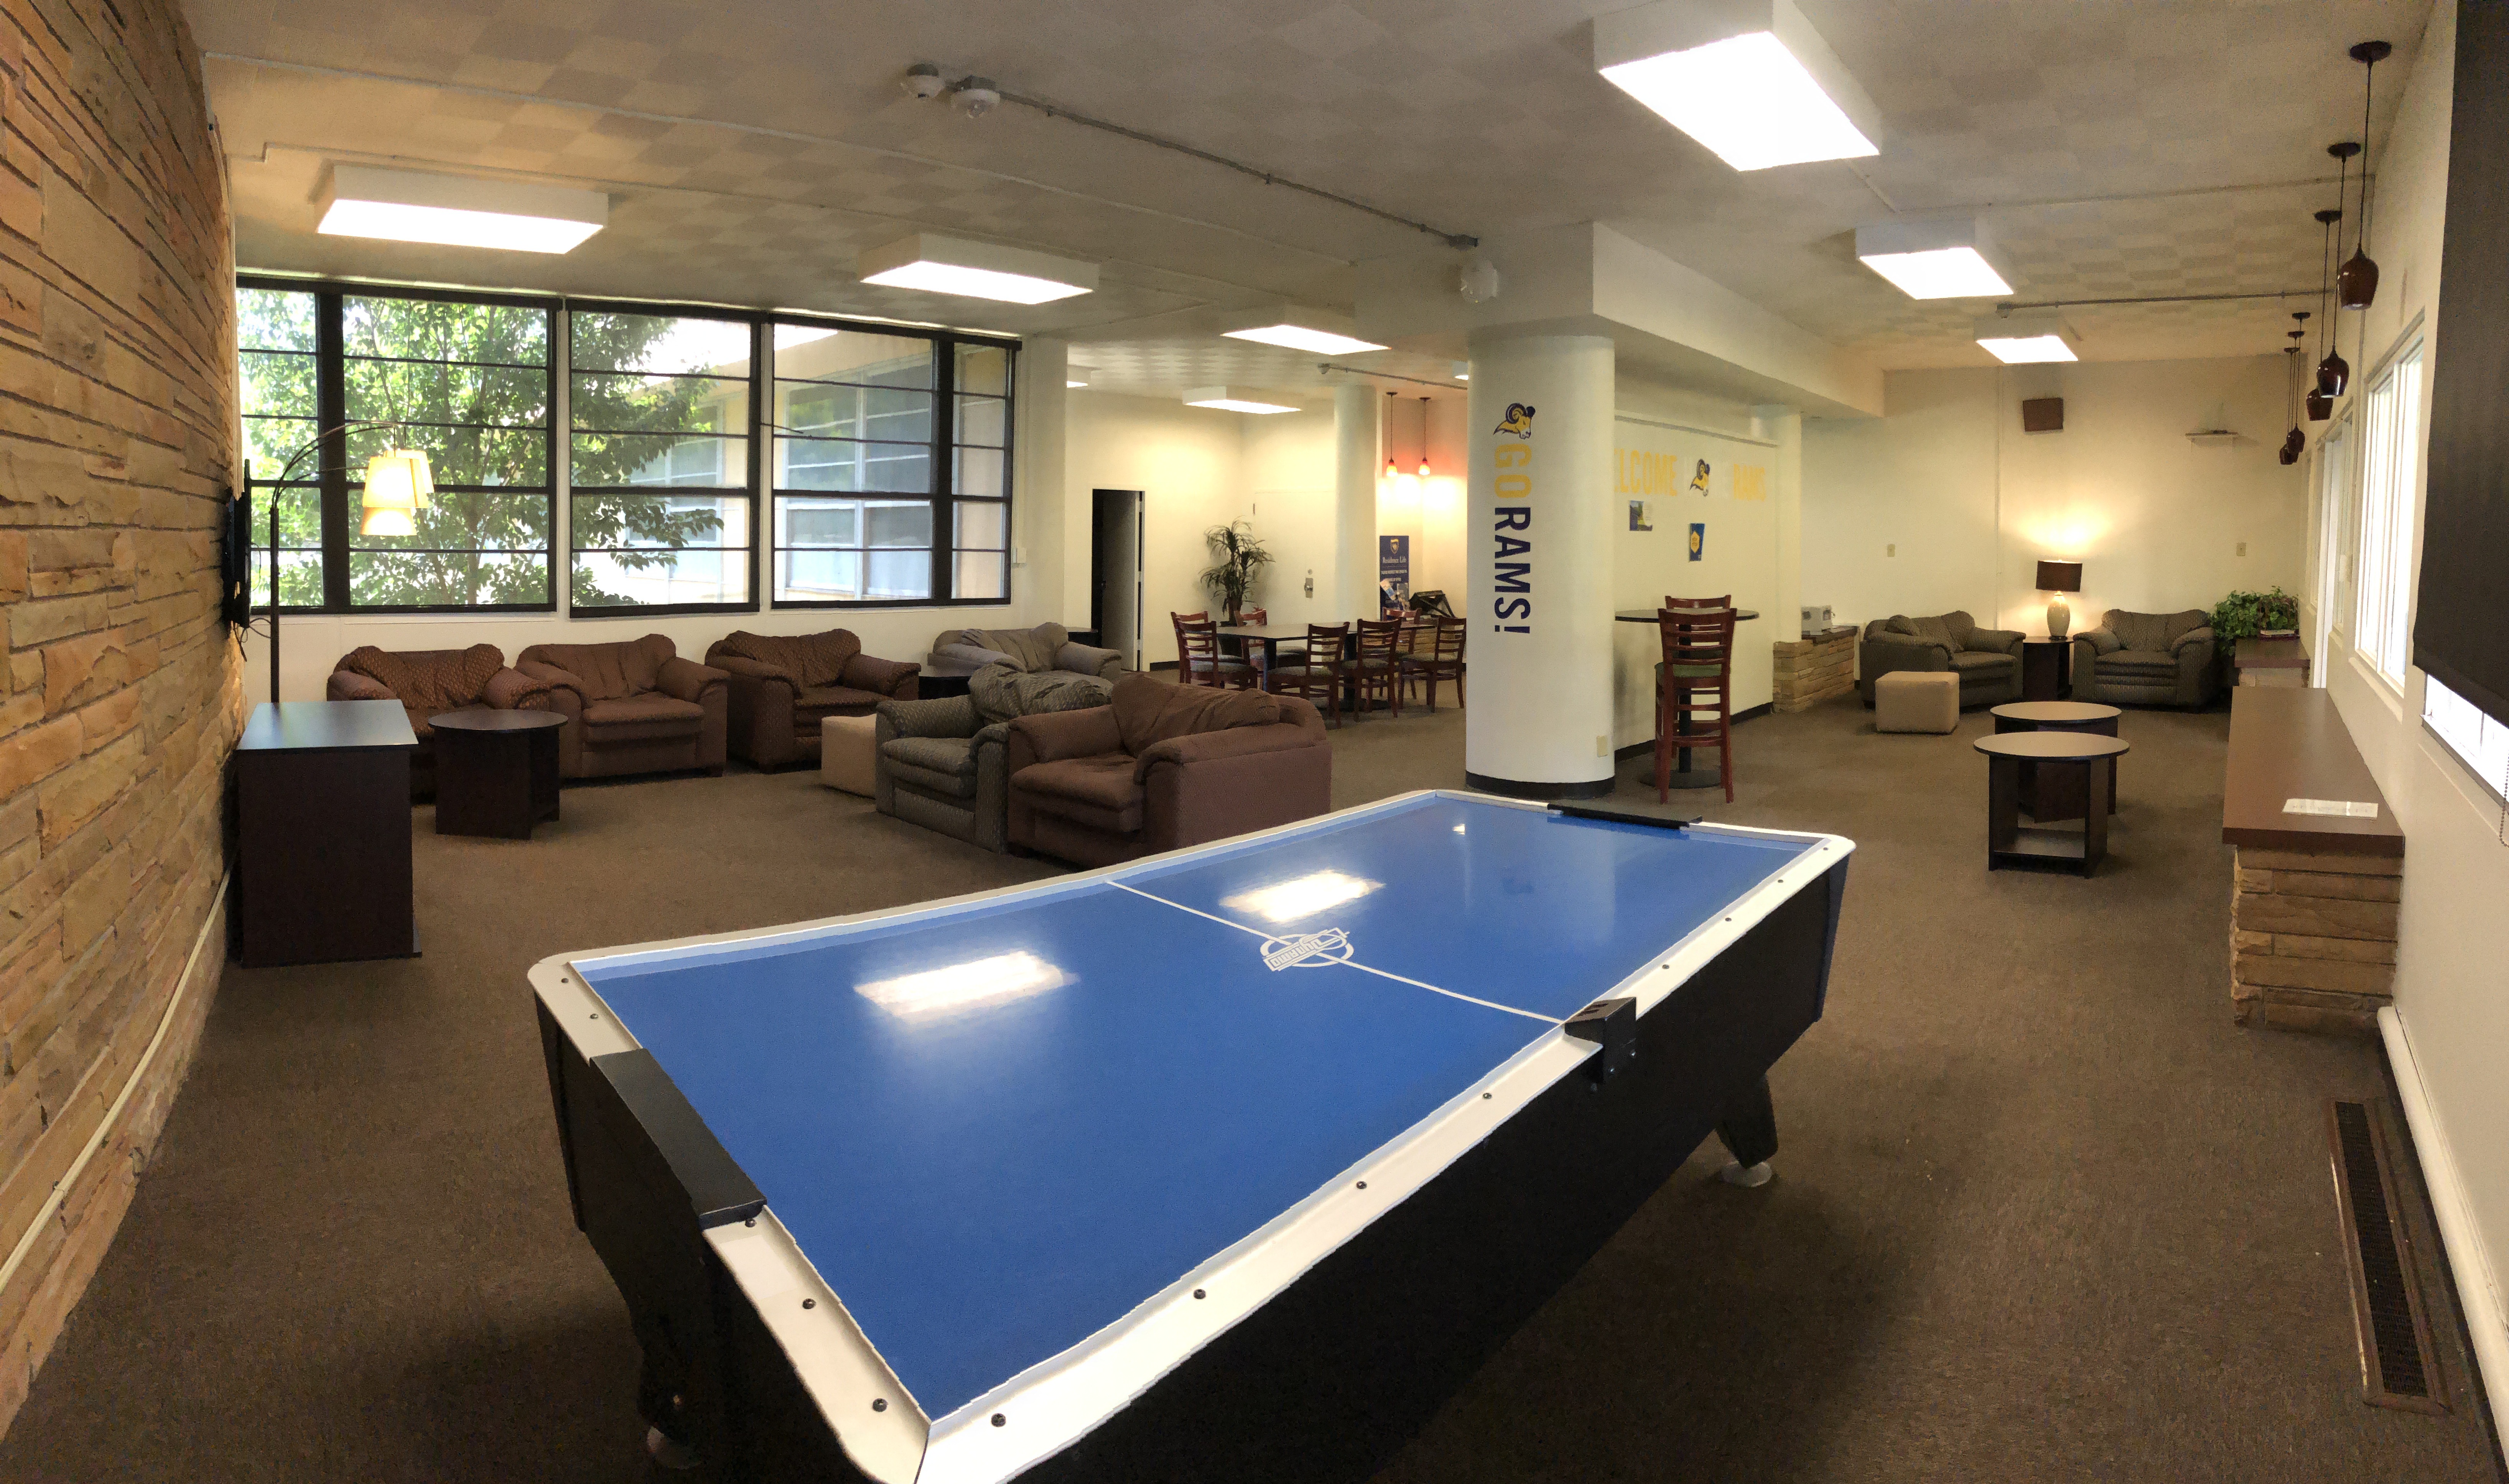 Residence hall lobby with couches, air hockey, tables